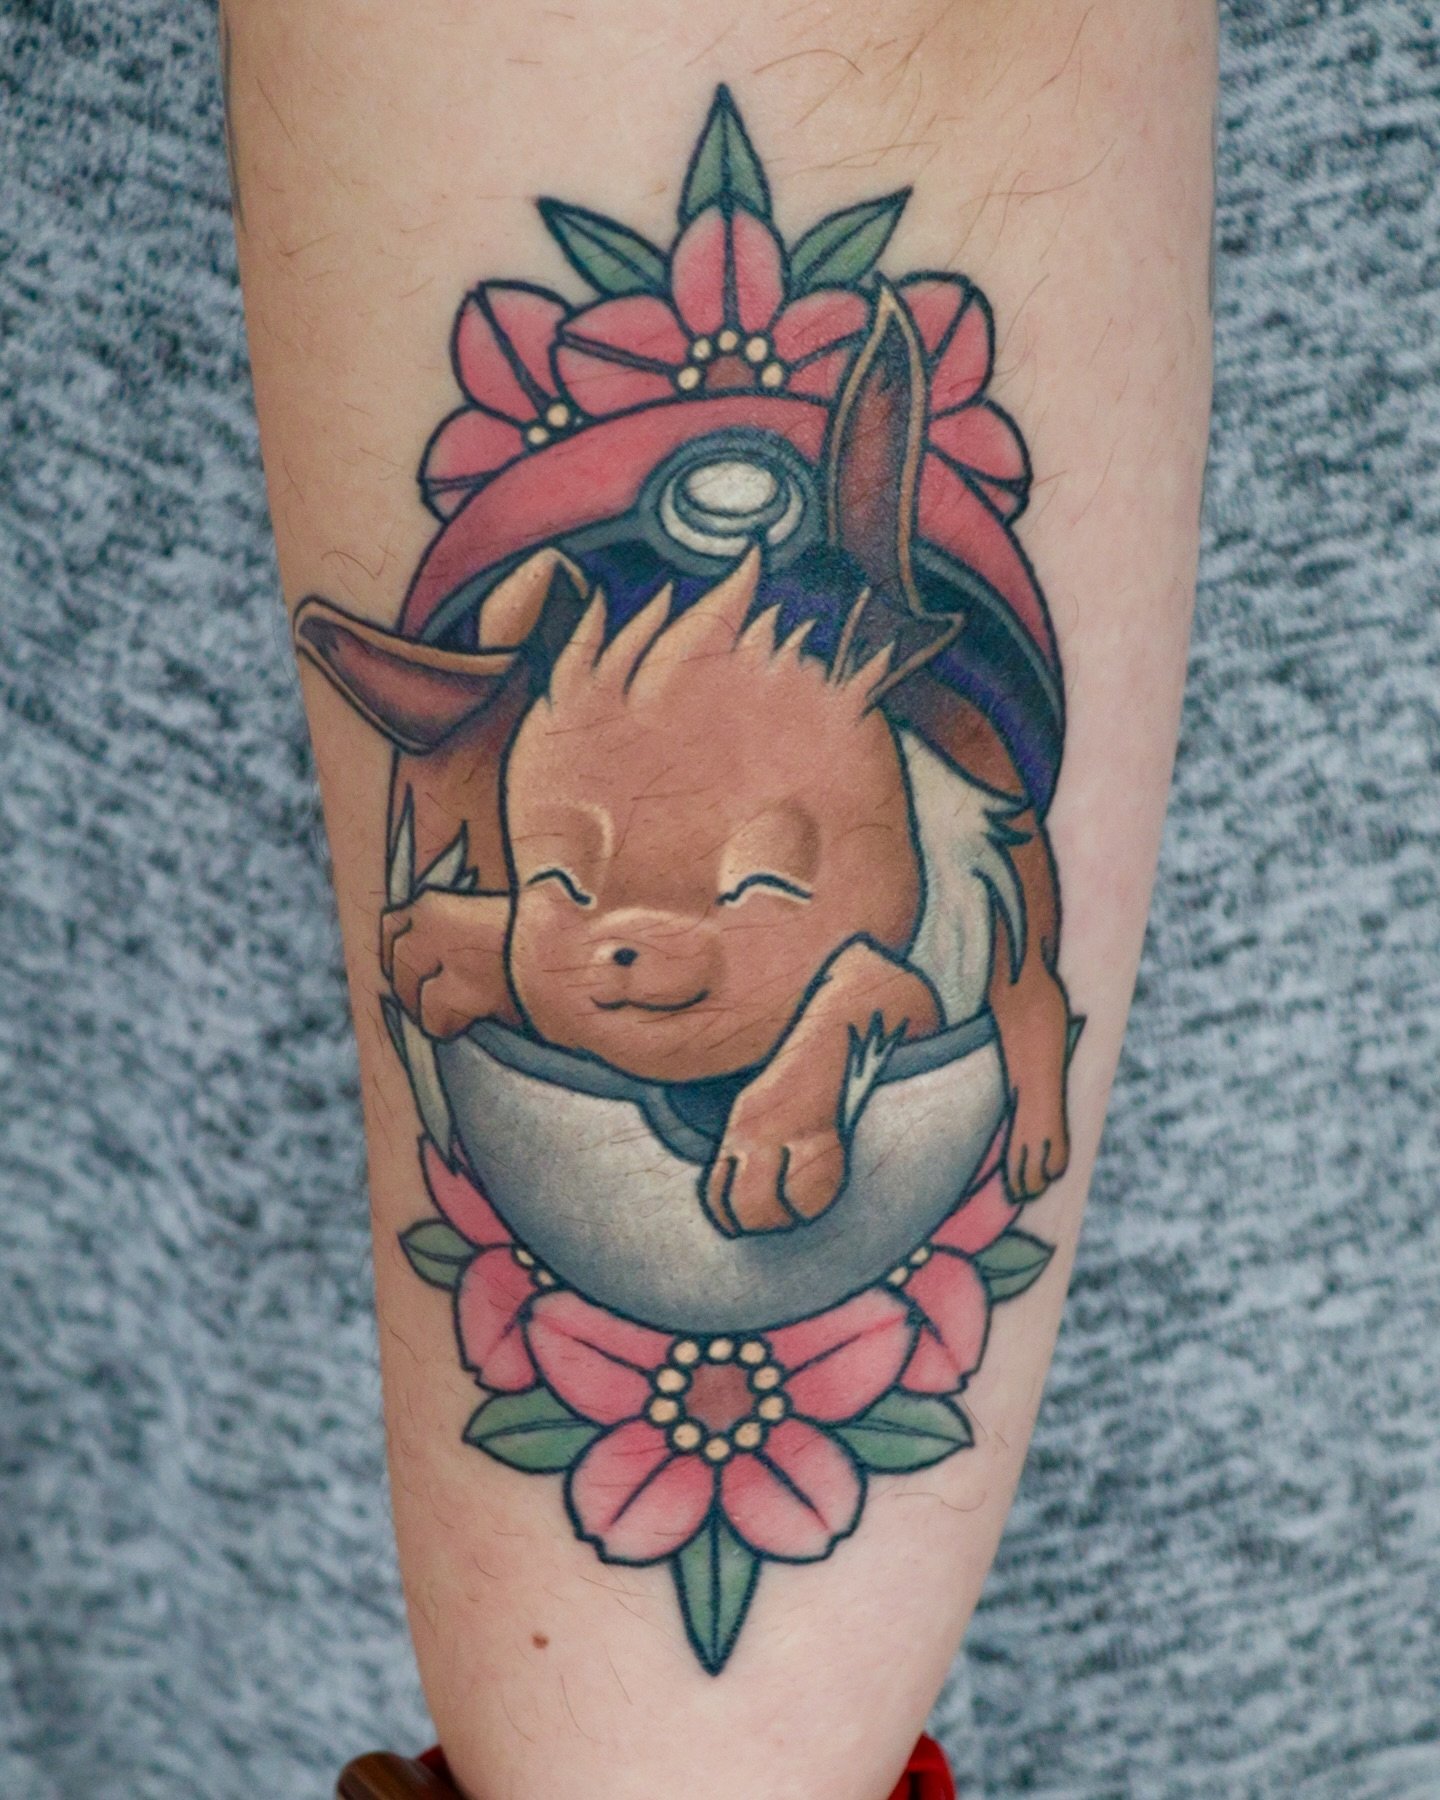 Healed Eevee 🦊 cheers! Would love to do more cutesy traditional style tatts🙏